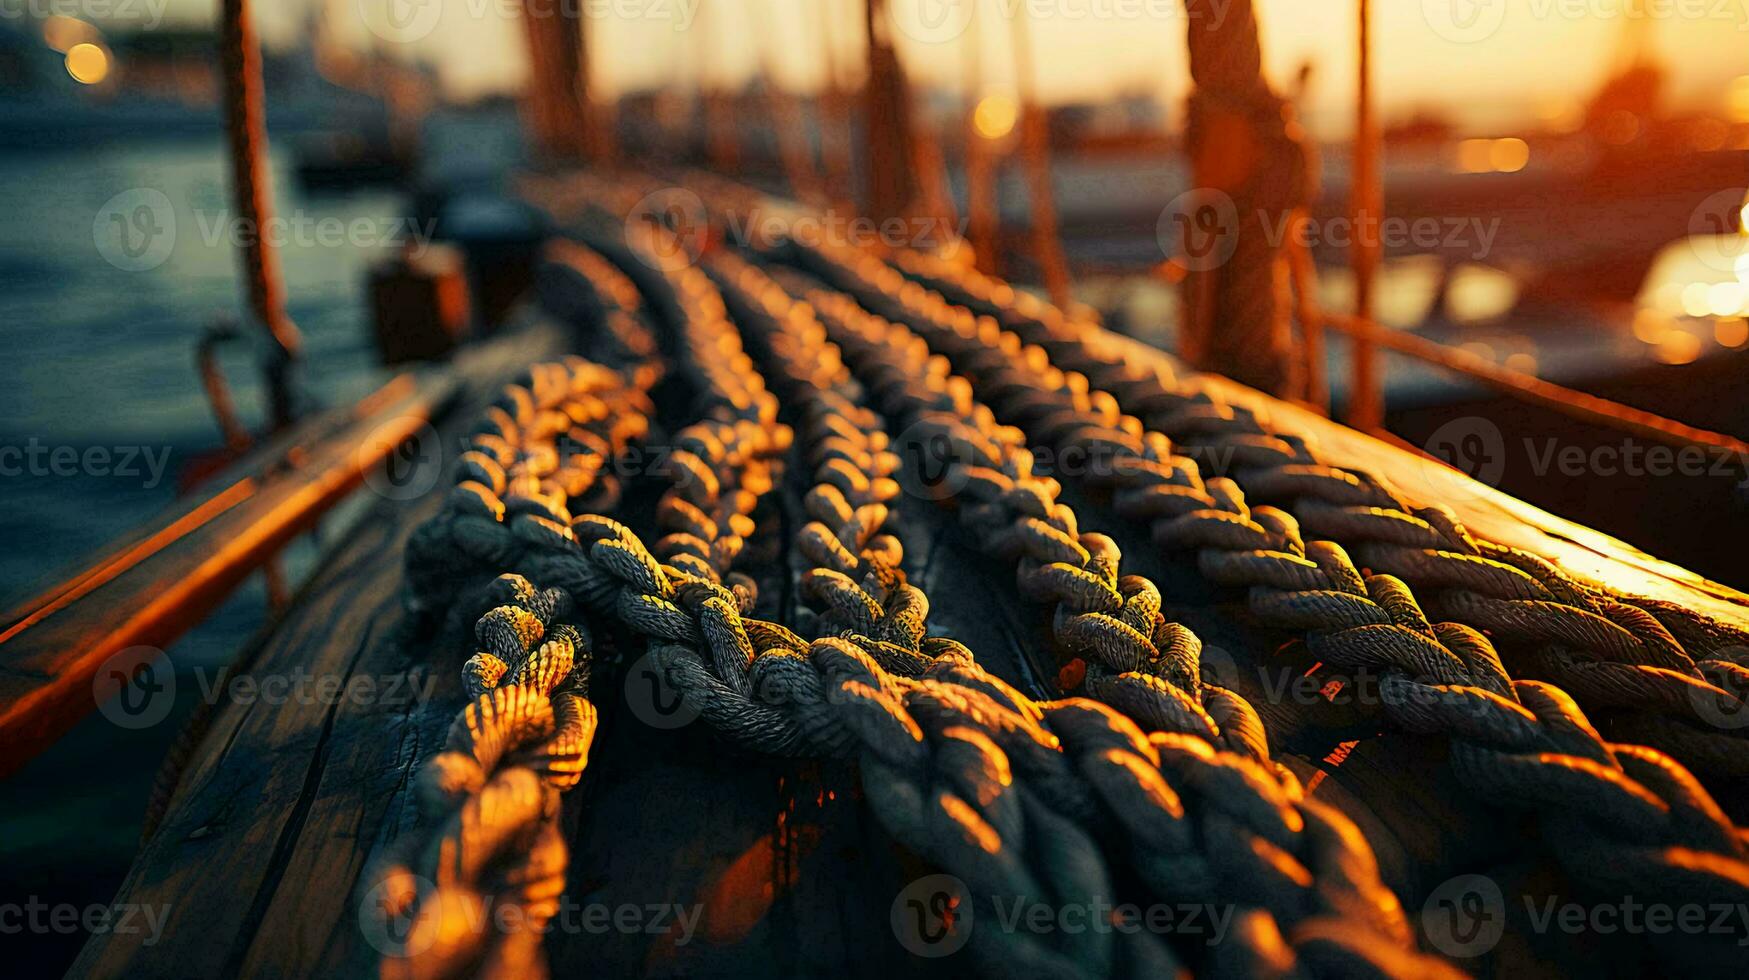 Large thick strong marine ropes for ships lie on a wooden pier